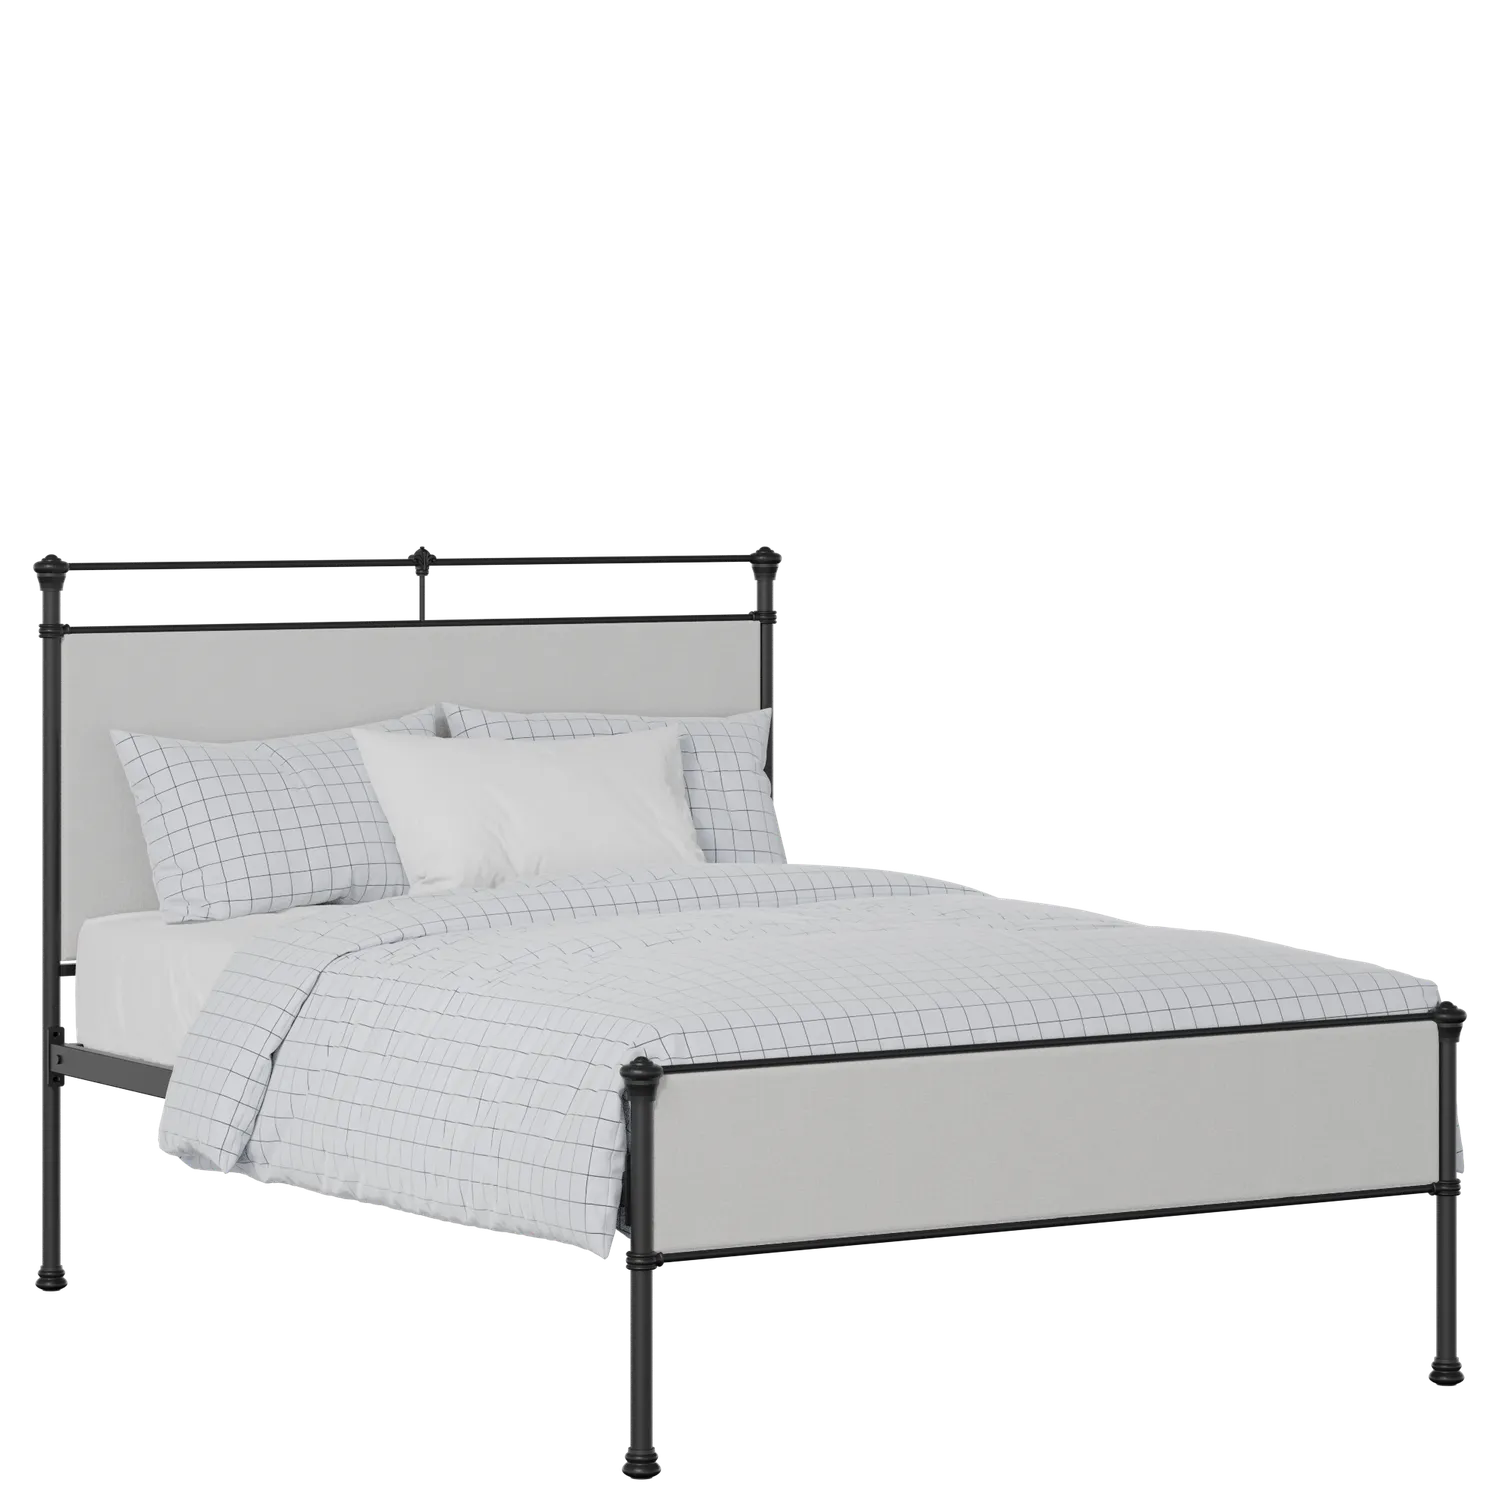 Nancy Slim iron/metal upholstered bed in black with silver fabric